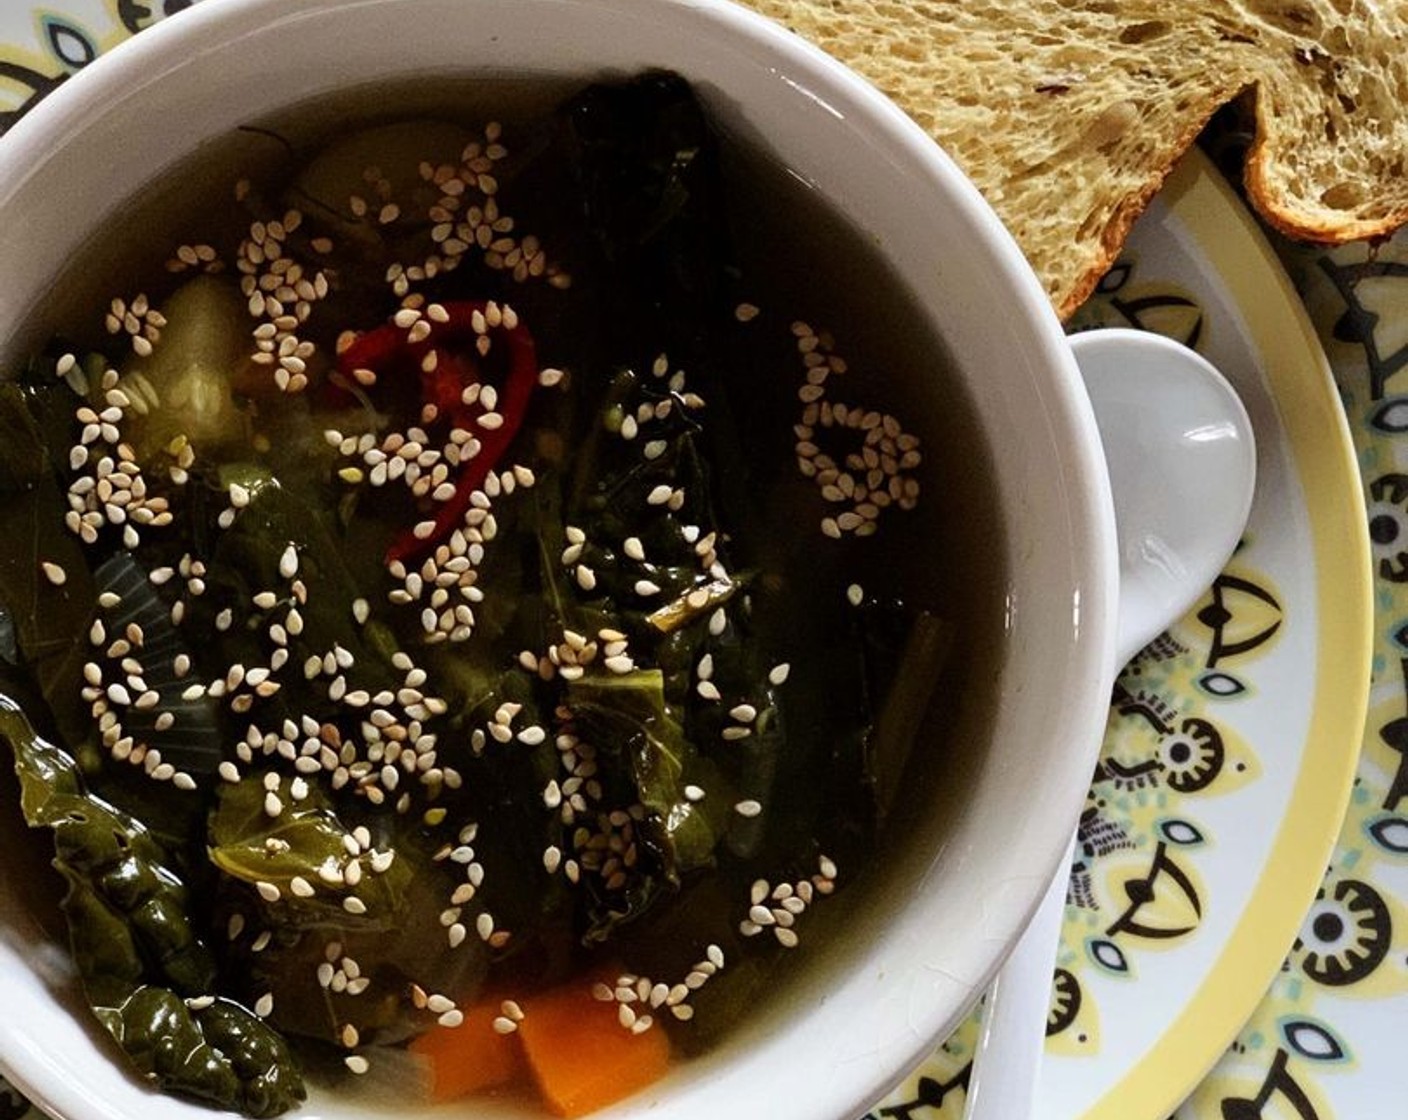 Miso Soup with Kale and Black Garlic